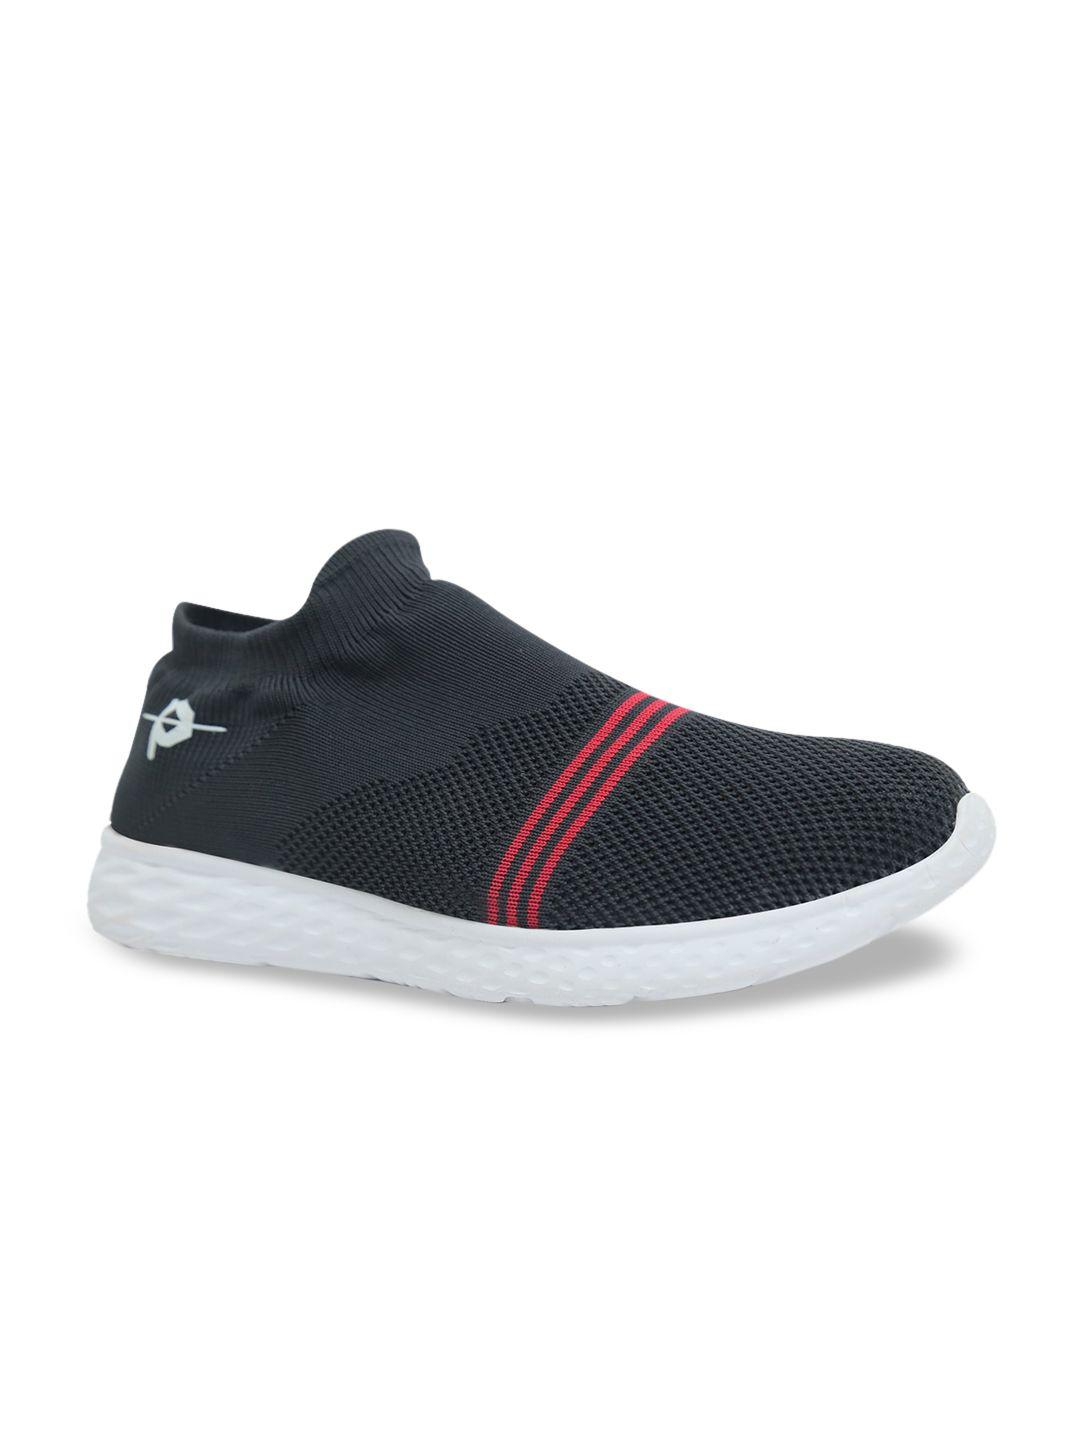 provogue-men-black-&-red-striped-mesh-mid-top-slip-on-sneakers